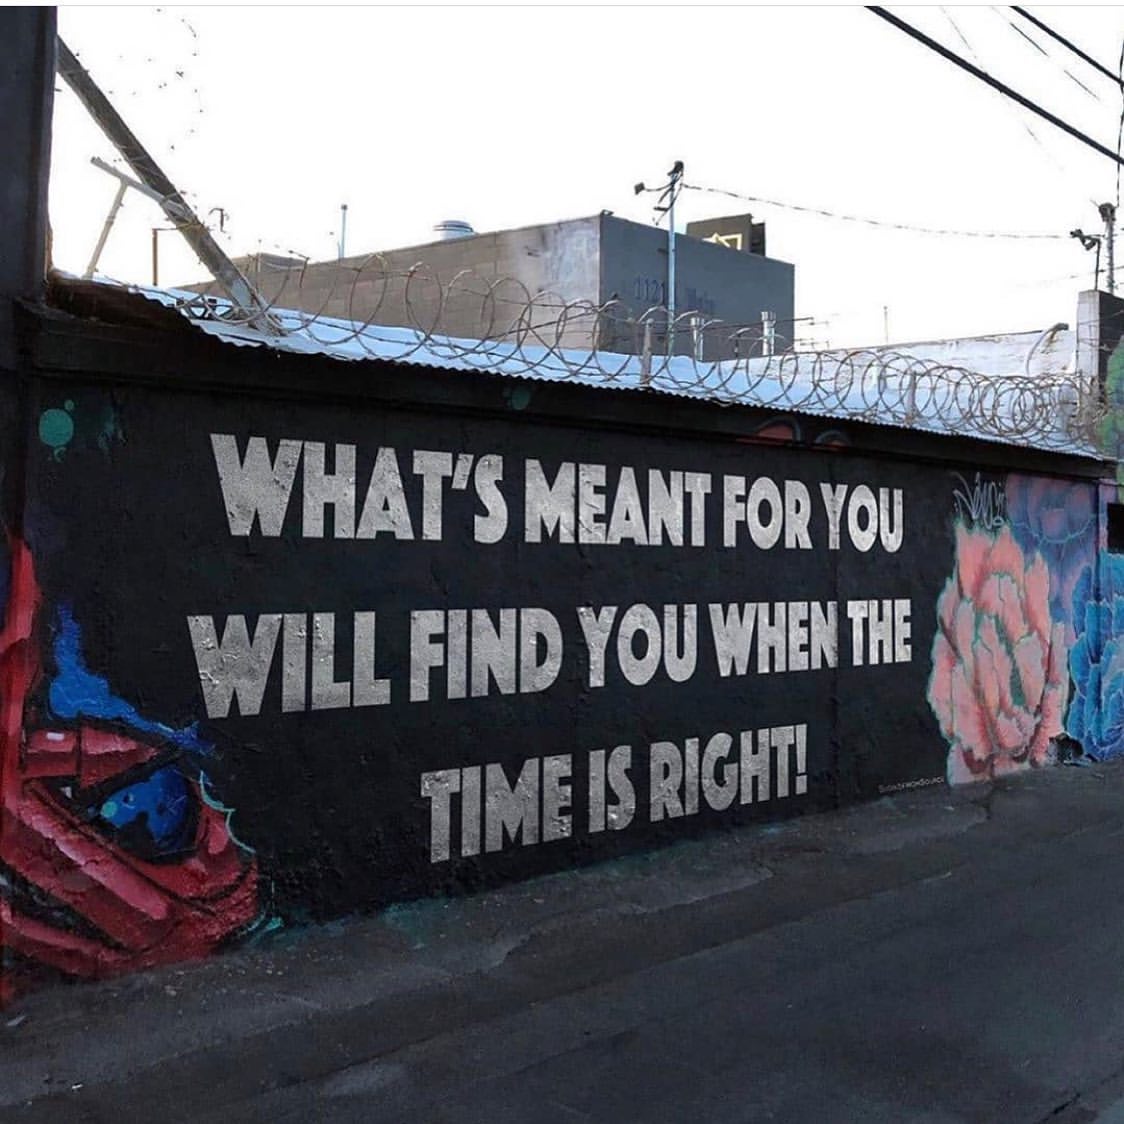 What' meant for you will find you when the time is right!